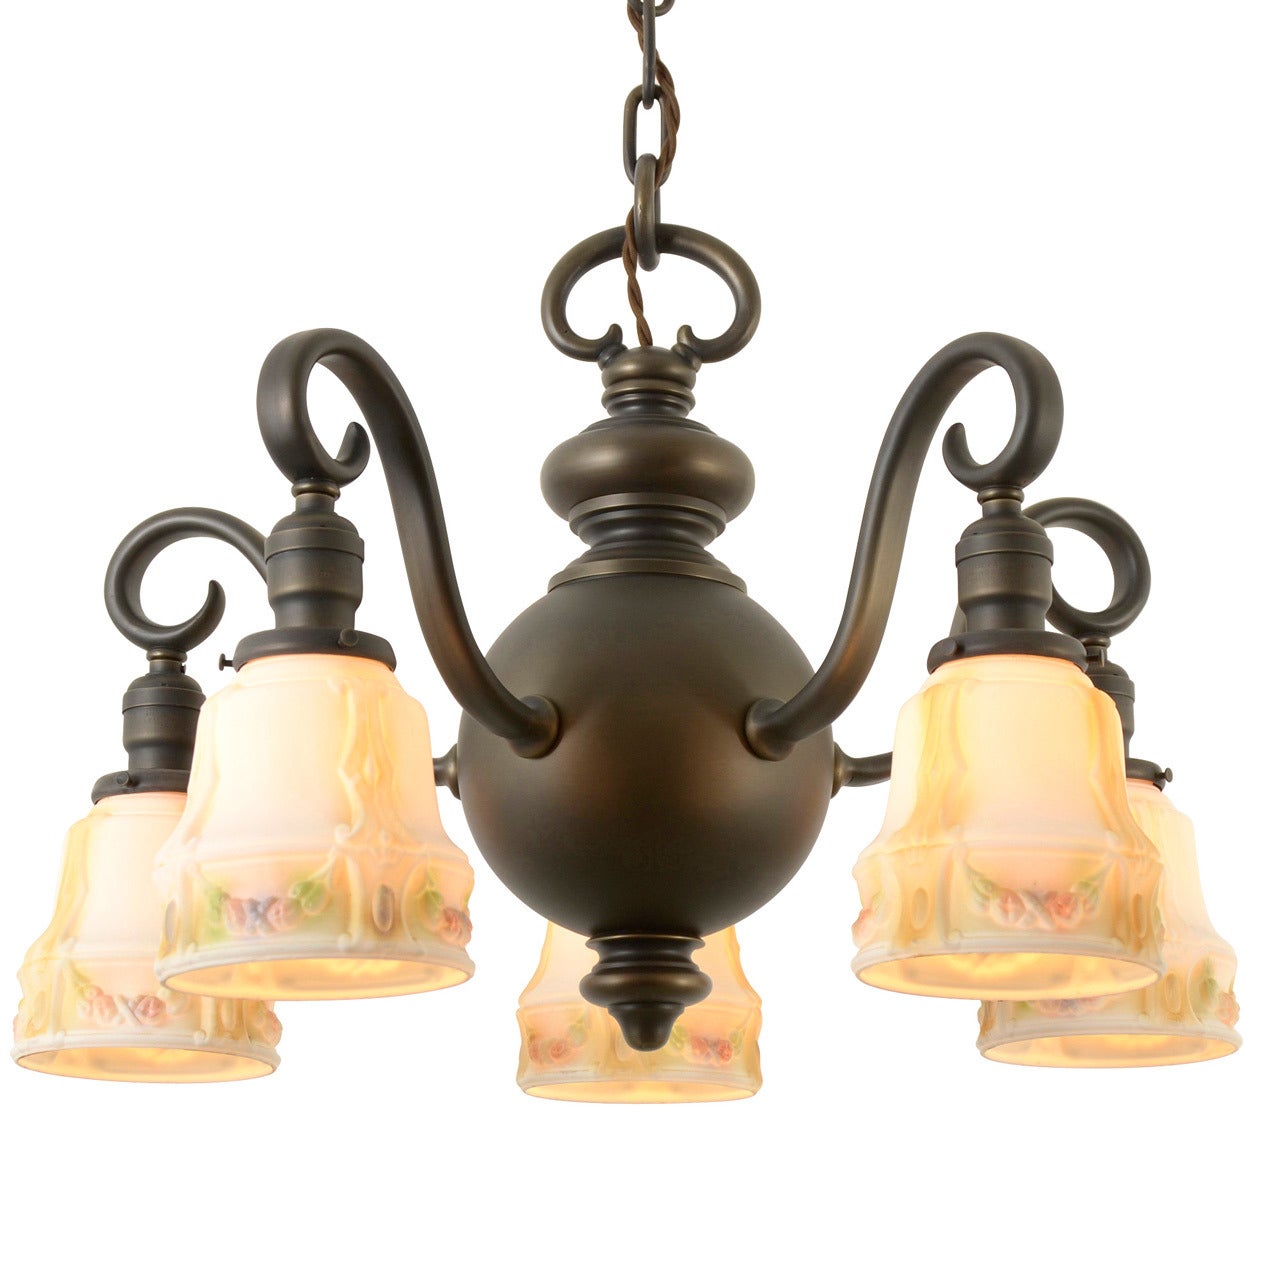 Elegant and Refined Colonial Revival Chandelier, circa 1920